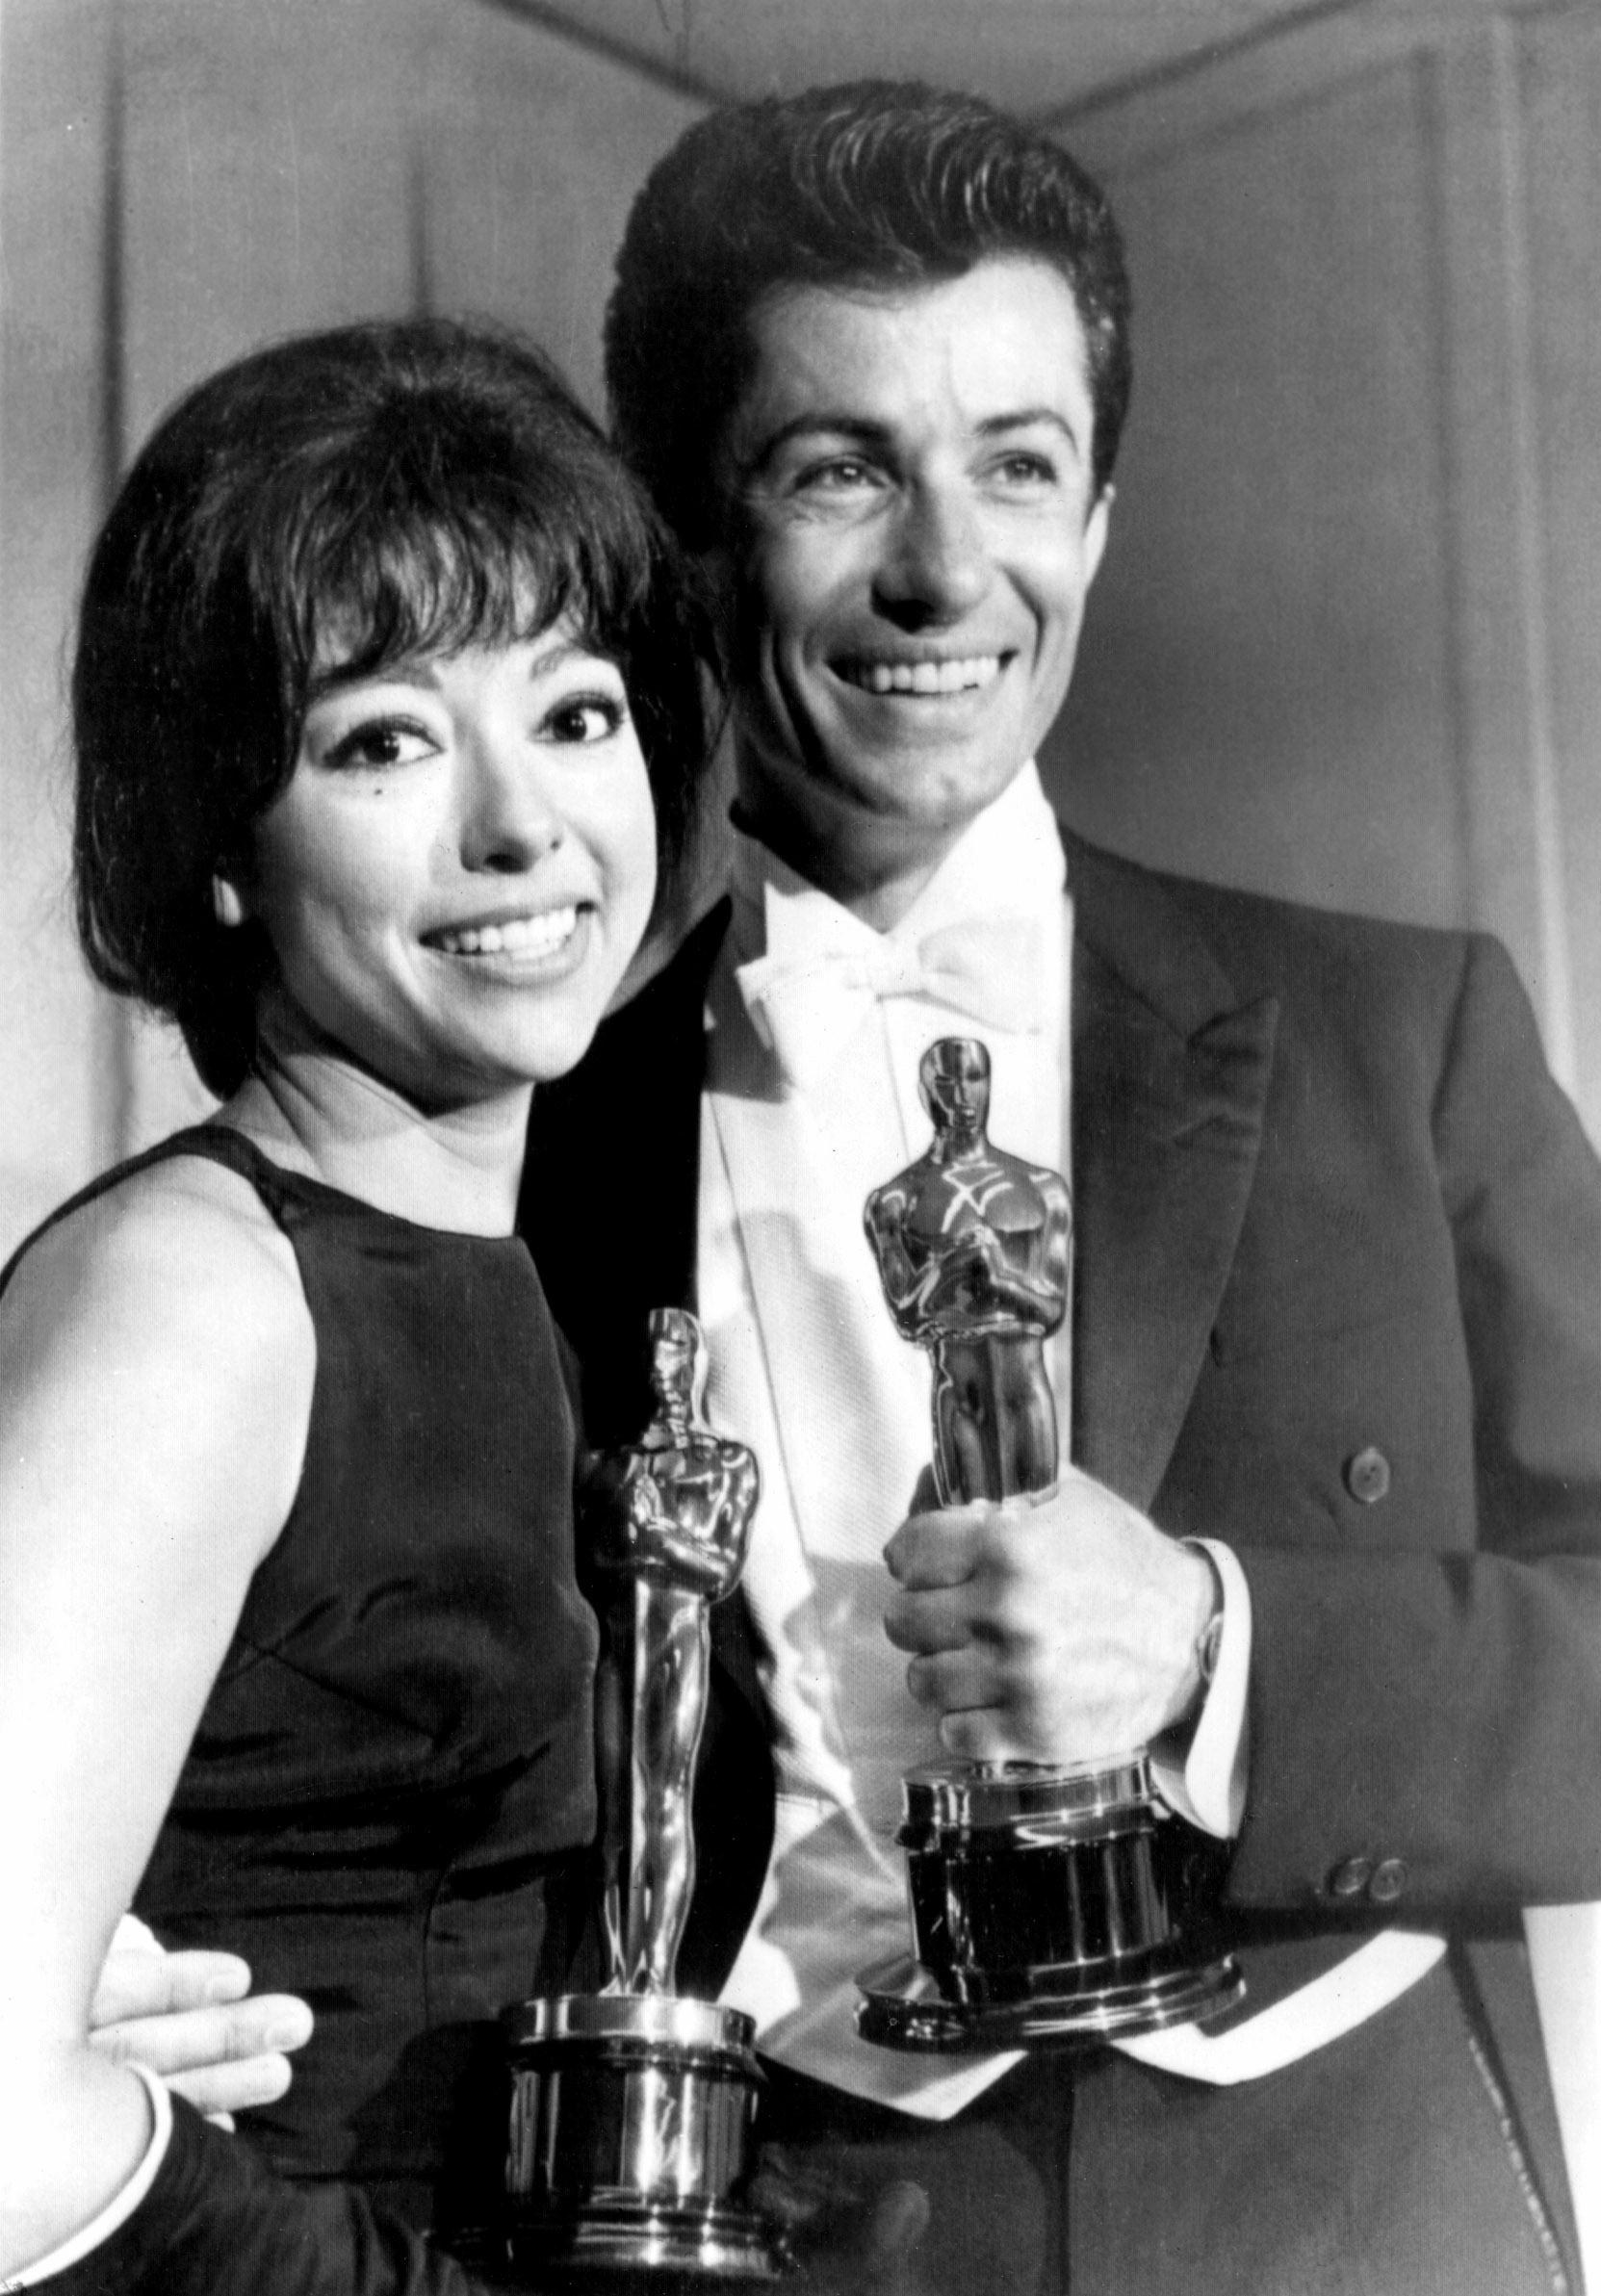 Moreno holding her Oscar with her co-star